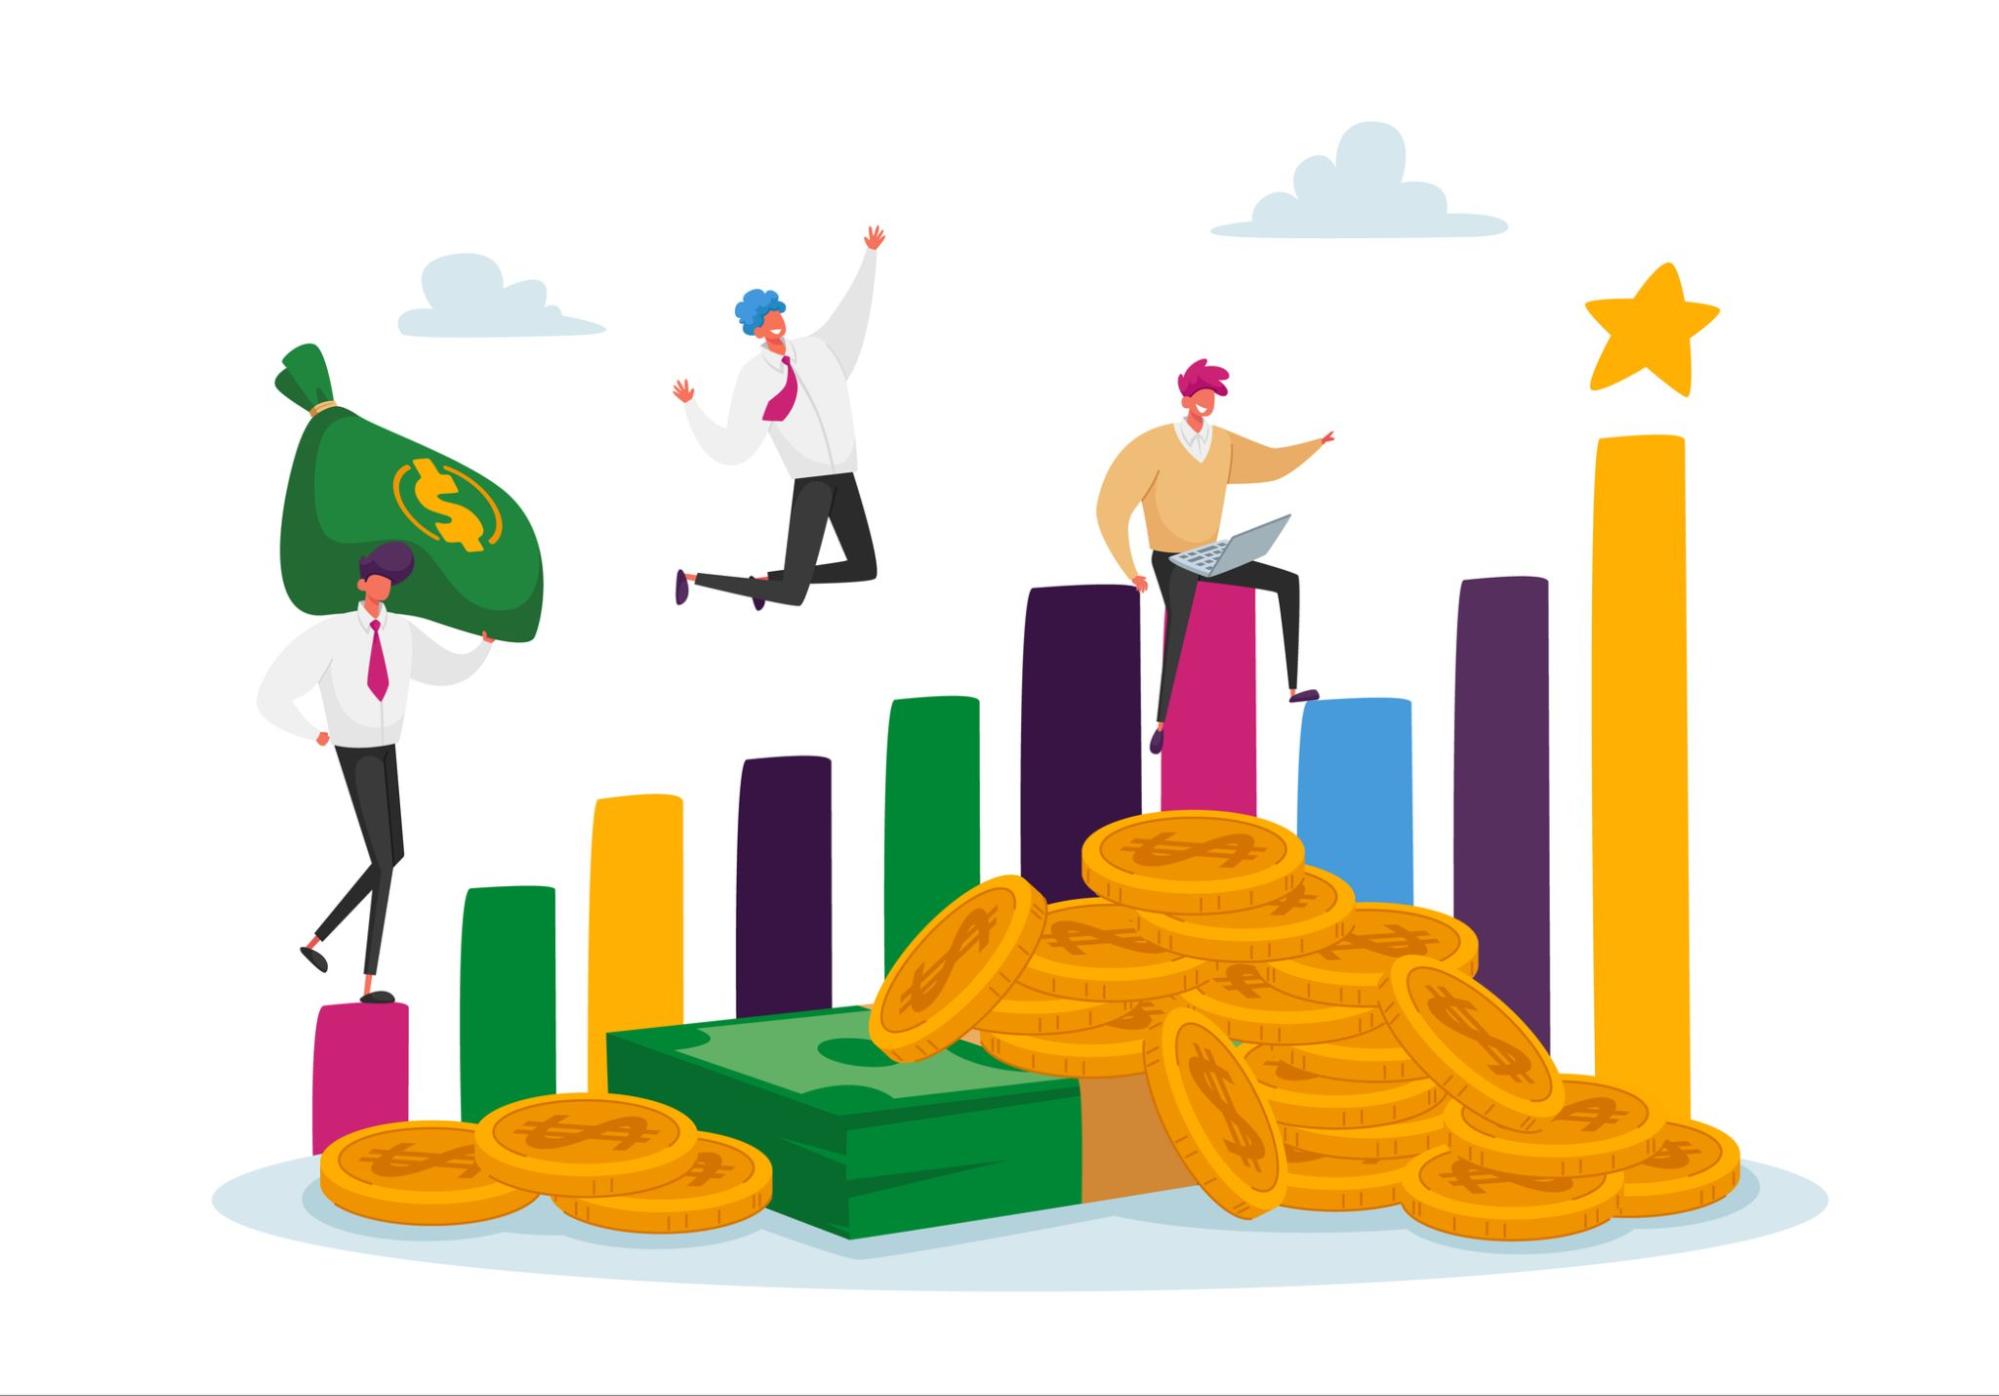 Illustration of joyful business men characters celebrating a profitable investment for their company, representing the concept of ROI for businesses who optimize multiple locations for local seo.